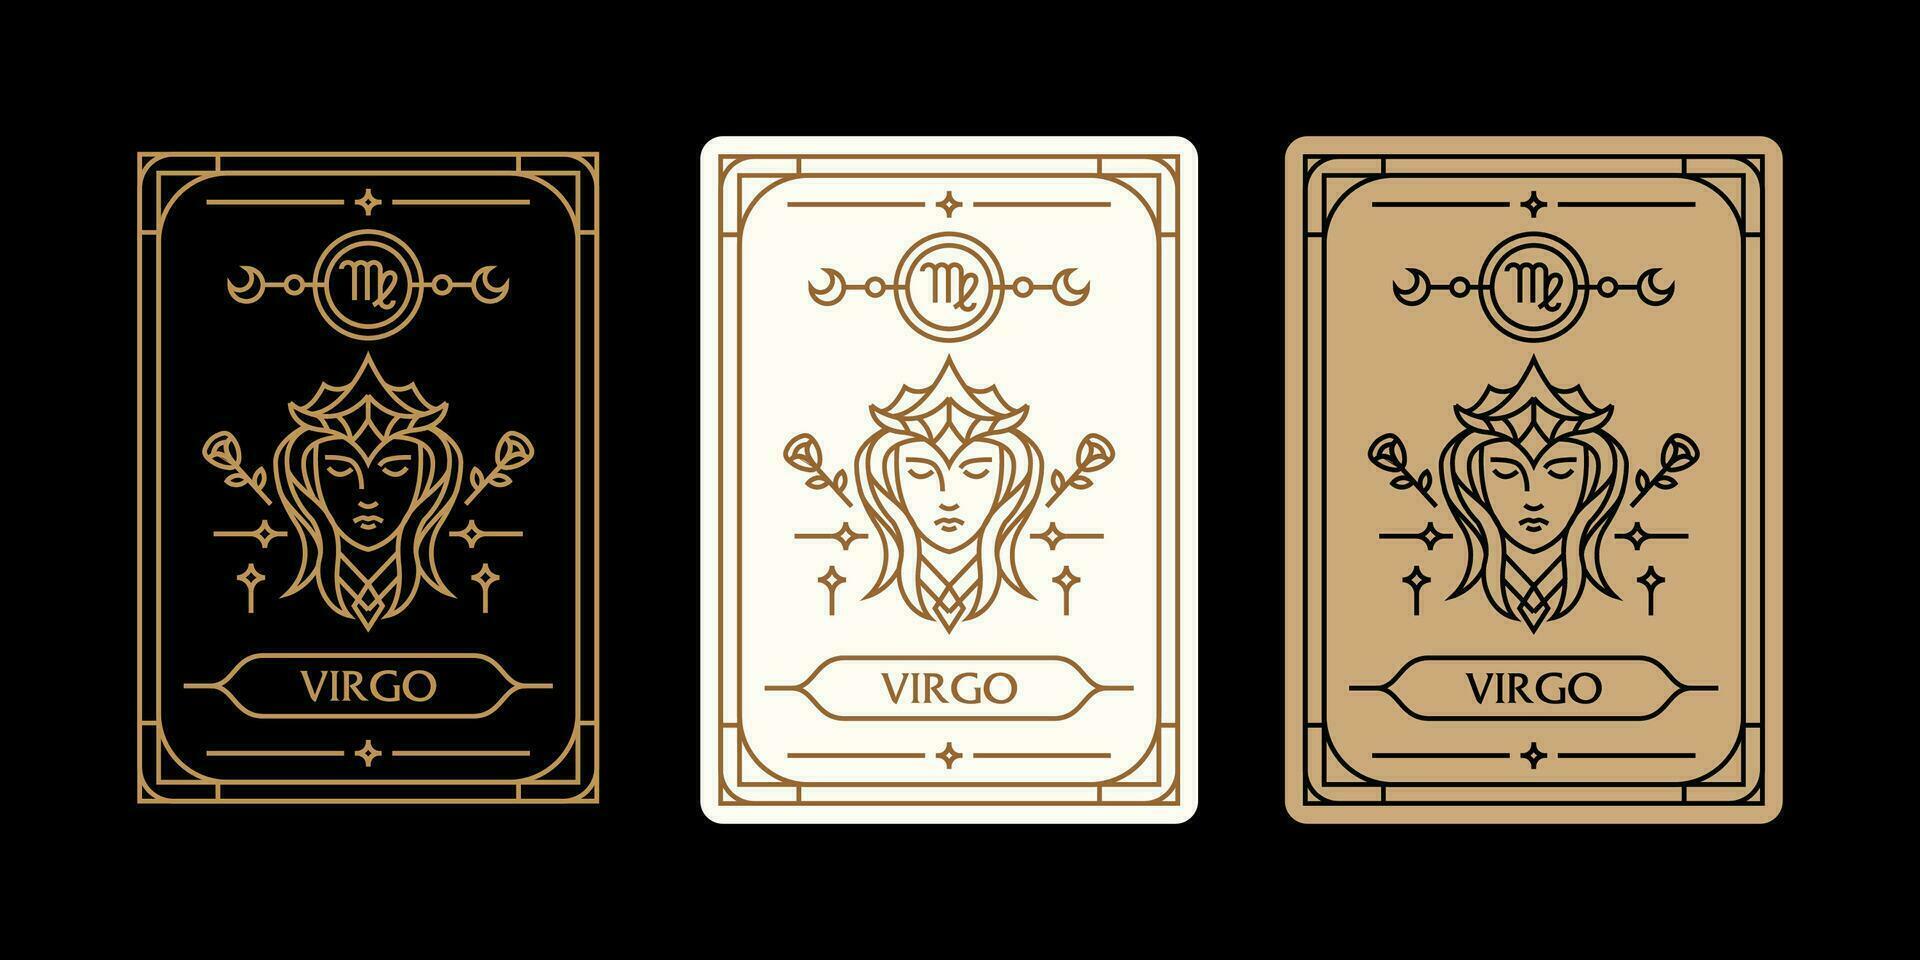 virgo zodiac sign astrology cards set , horoscope, tarot, fortune teller. Vintage mystical illustration outline hand drawing, magical esoteric horoscope templates for wall print poster vector